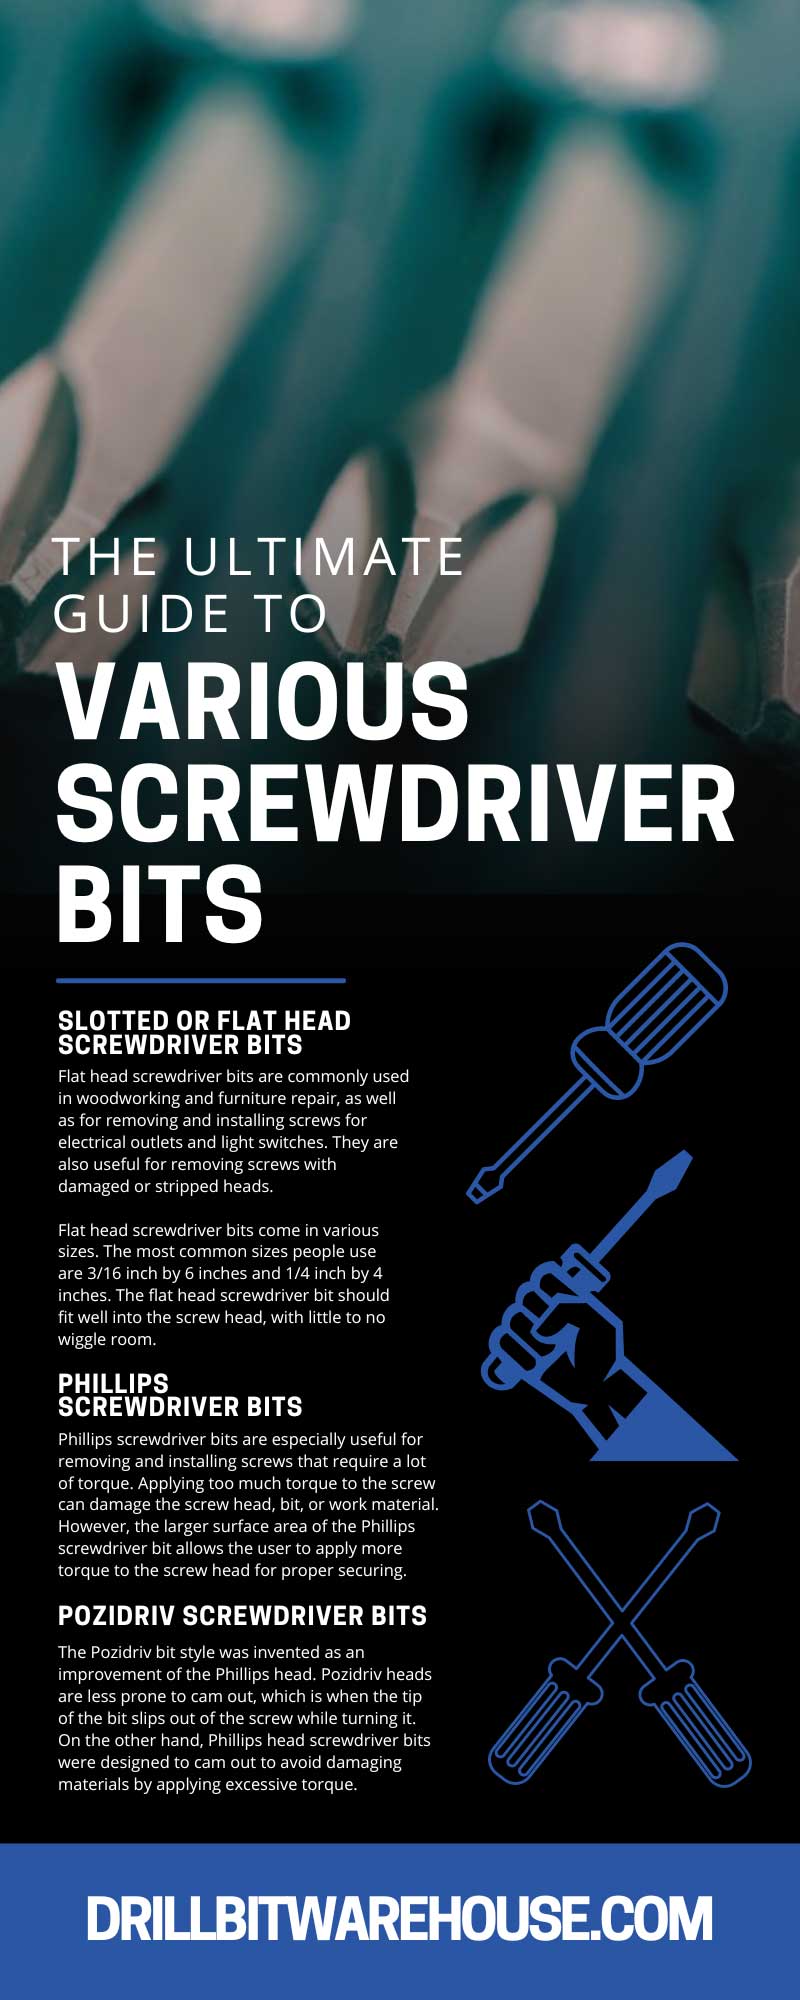 The Ultimate Guide to Various Screwdriver Bits